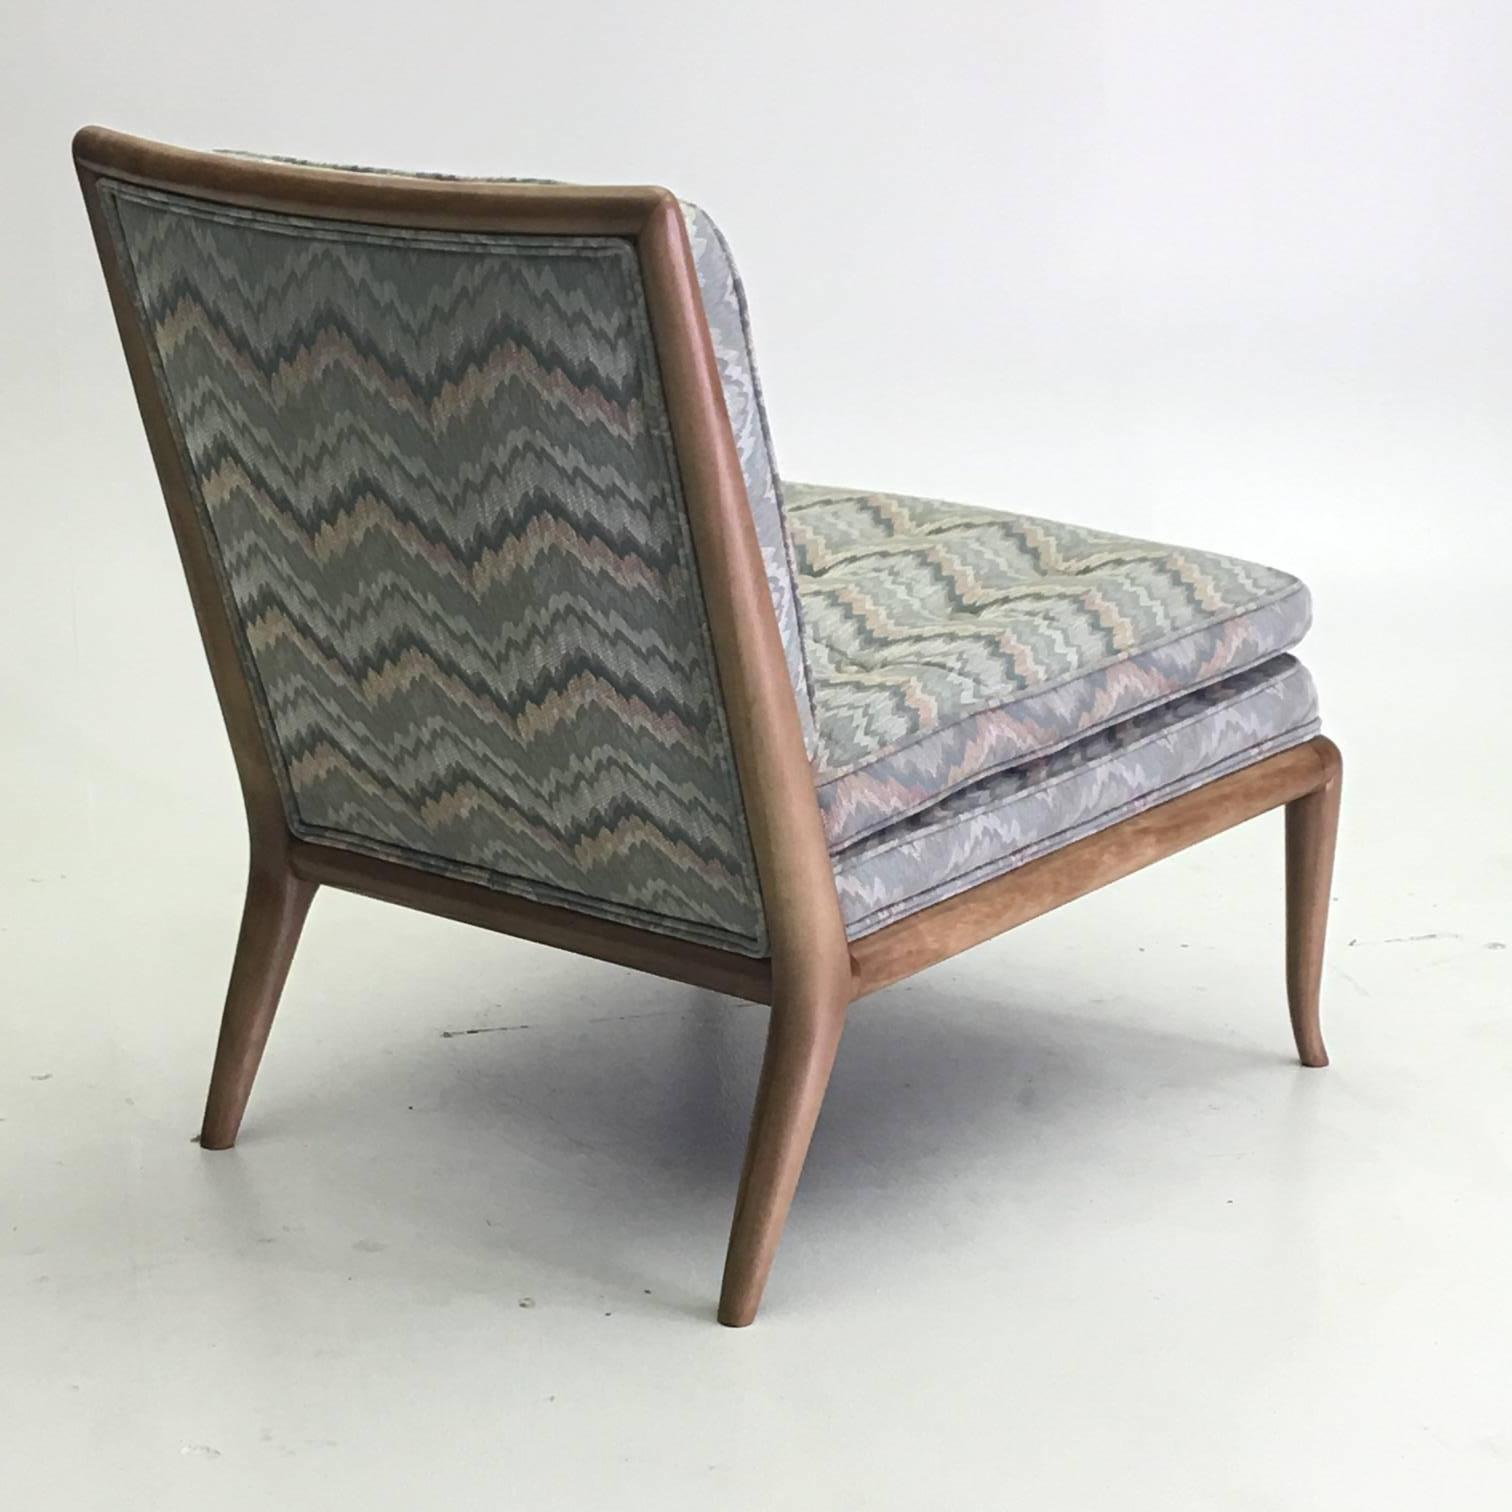 T.H. Robsjohn-Gibbings for Widdicomb in its original upholstery. Fabric is in exquisite condition and retains original label to seat. Frame has been freshly refinished and also impeccable.

Seat cushion is tufted and exceptionally